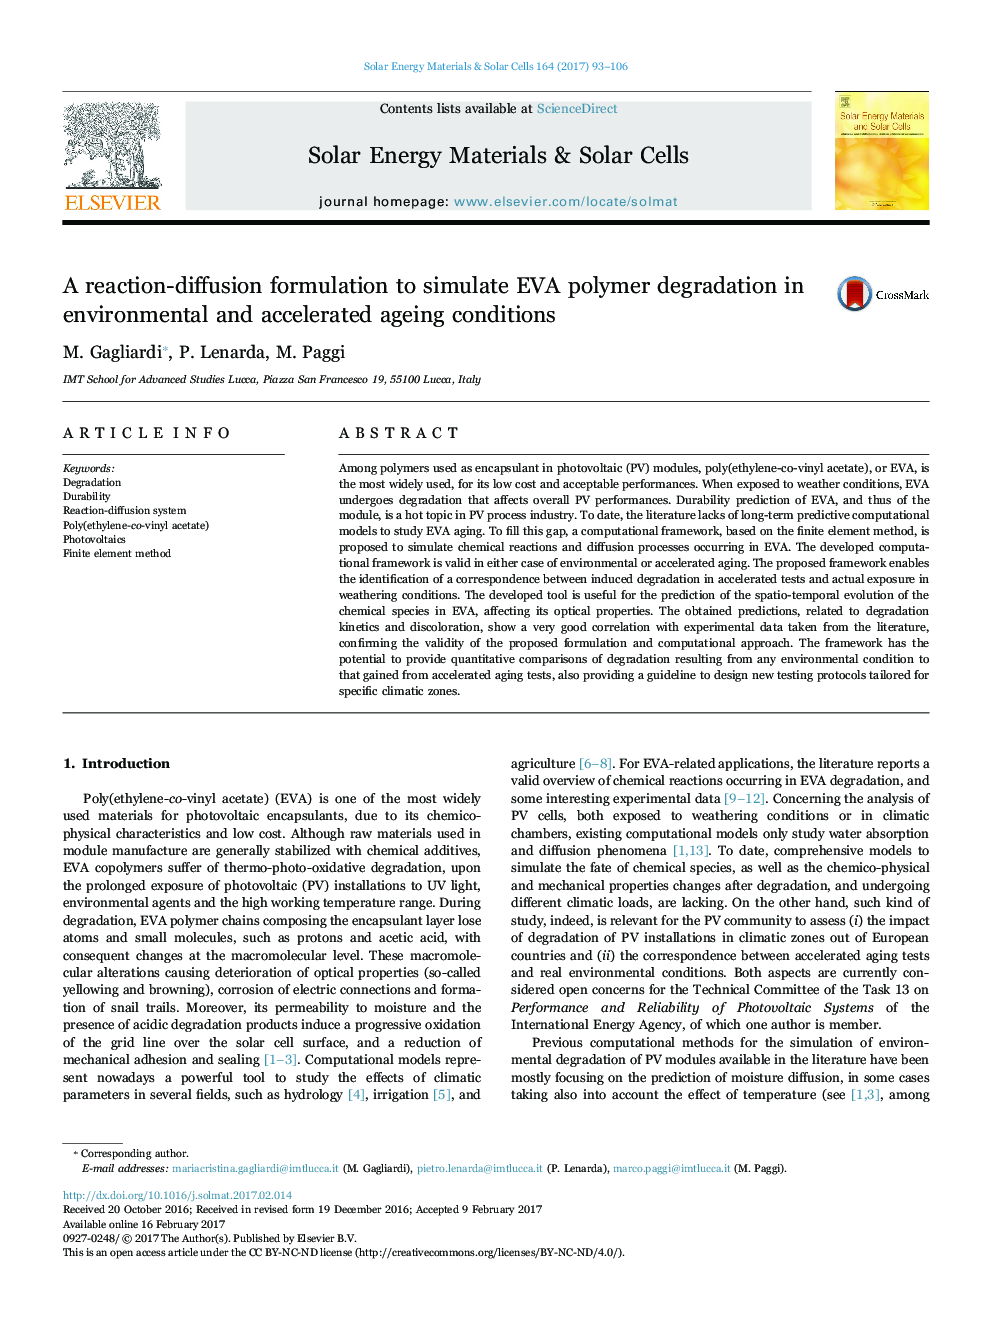 A reaction-diffusion formulation to simulate EVA polymer degradation in environmental and accelerated ageing conditions